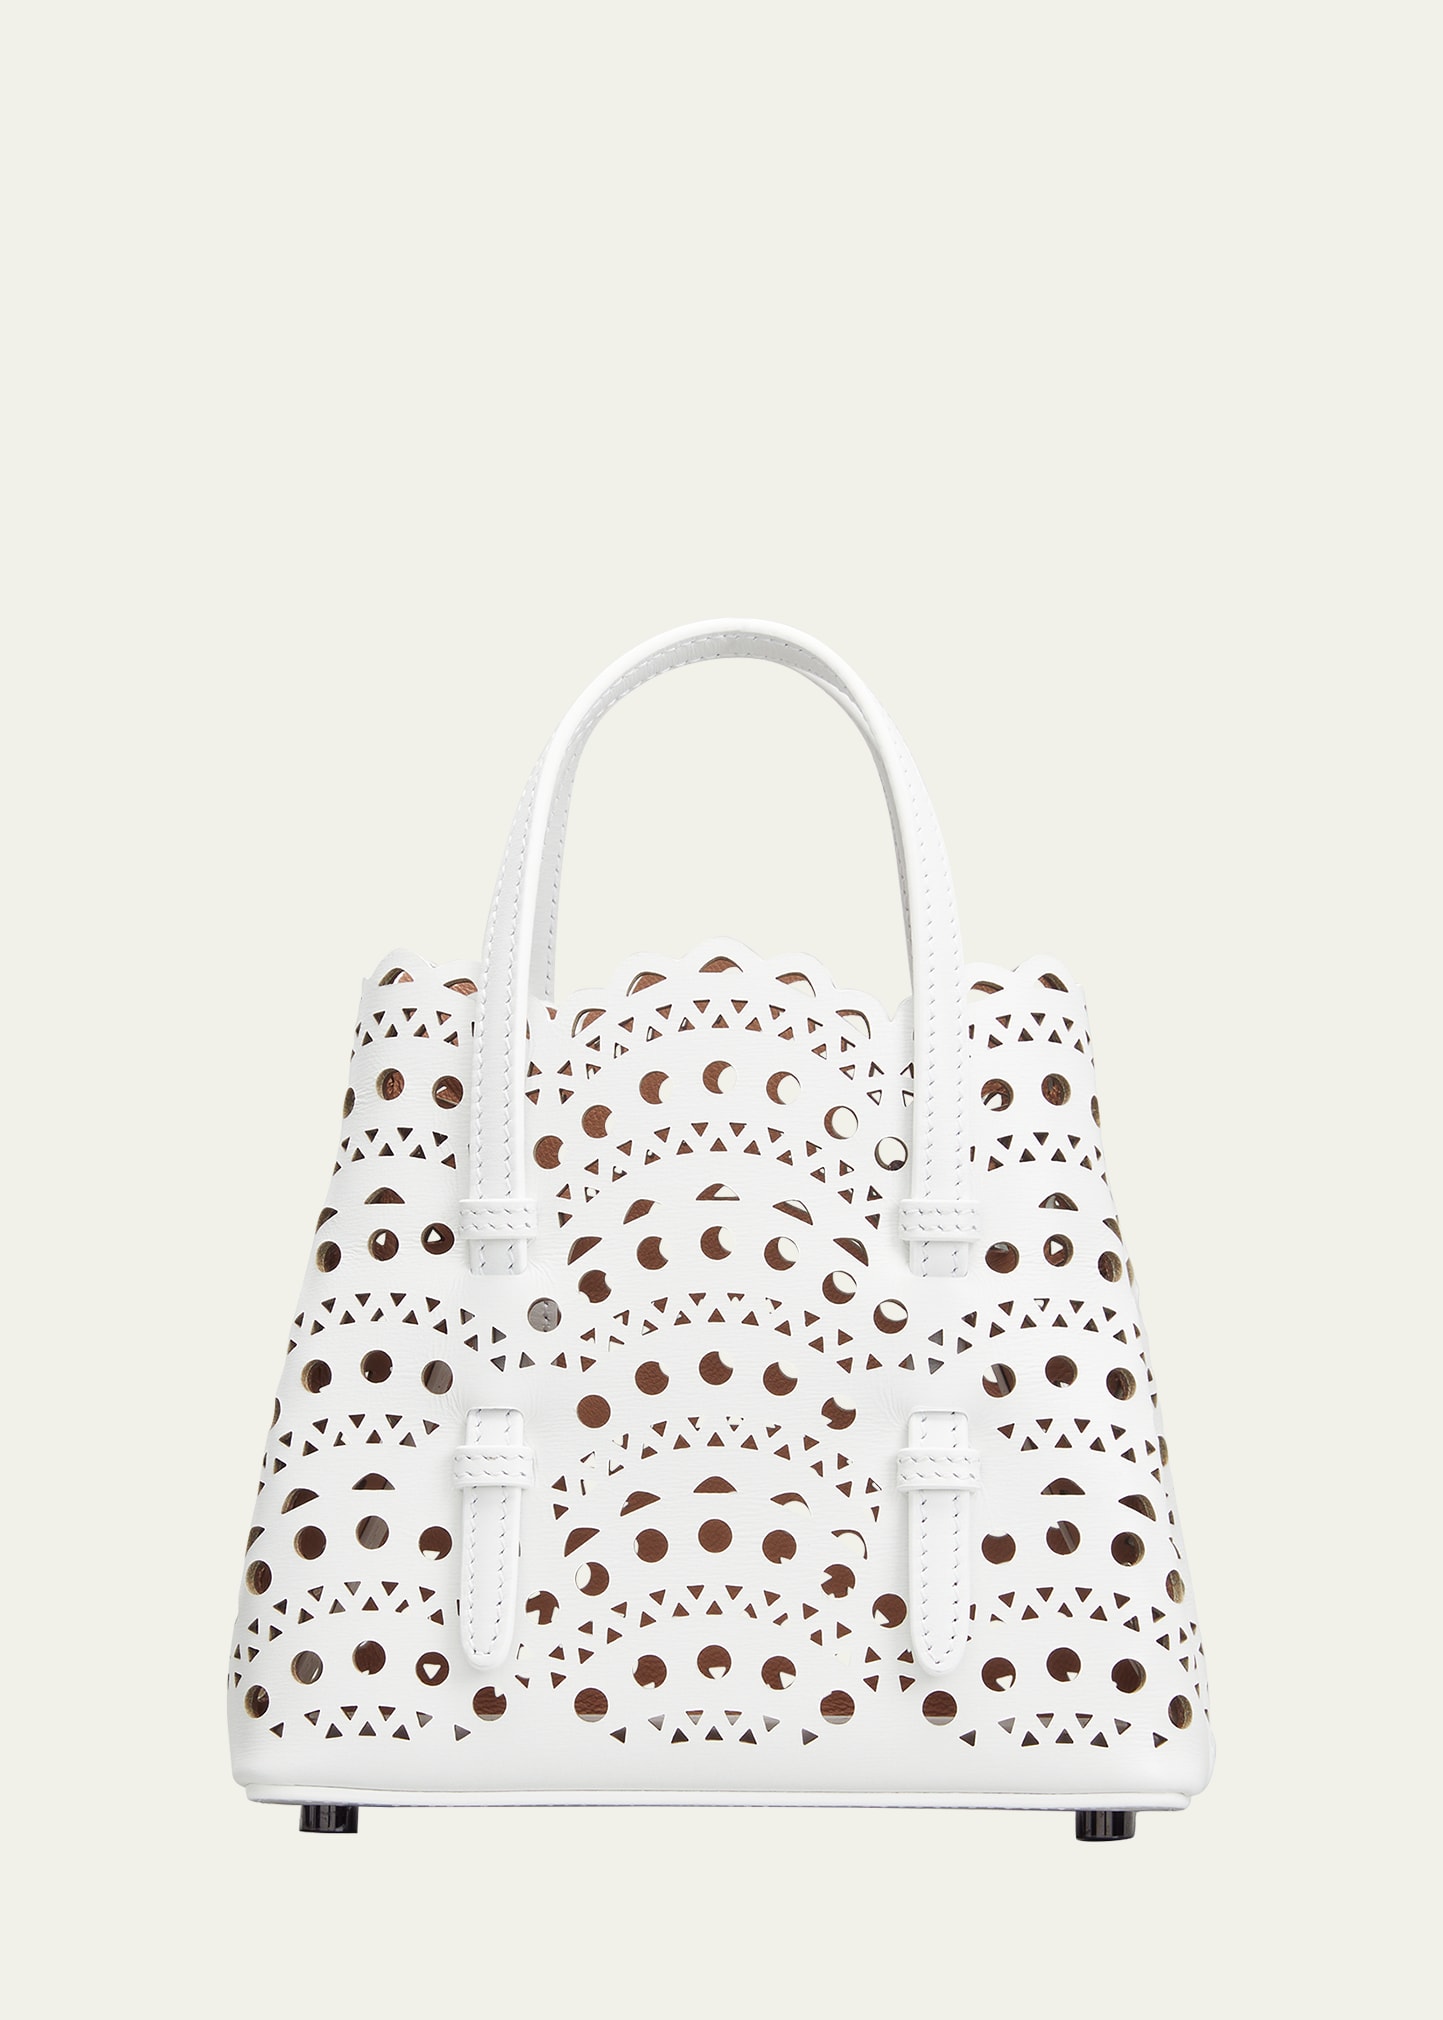 Mina 16 Tote Bag in Vienne Wave Perforated Leather